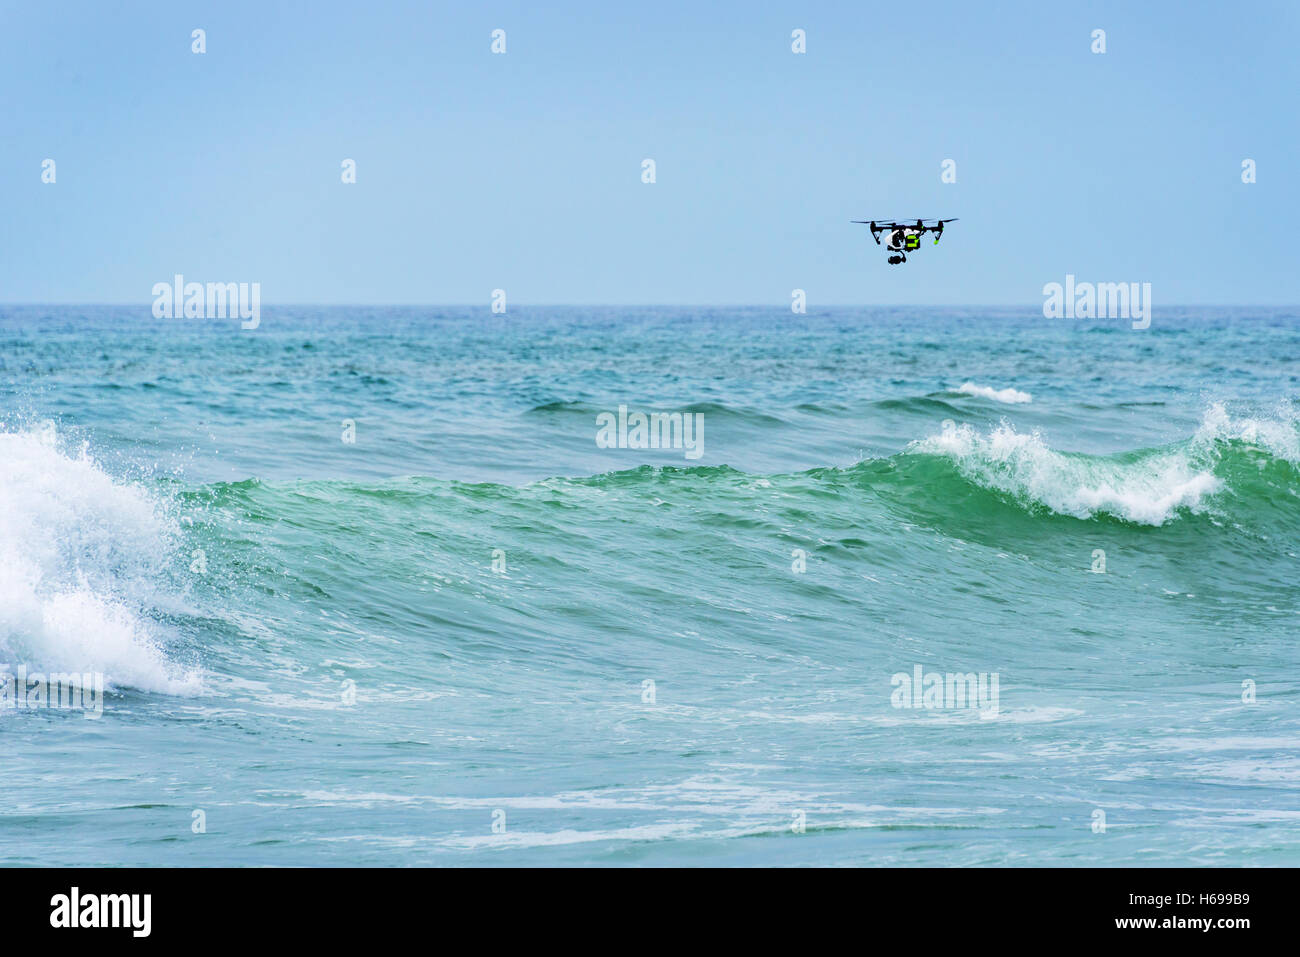 Drone flying over the waves on the ocean Stock Photo